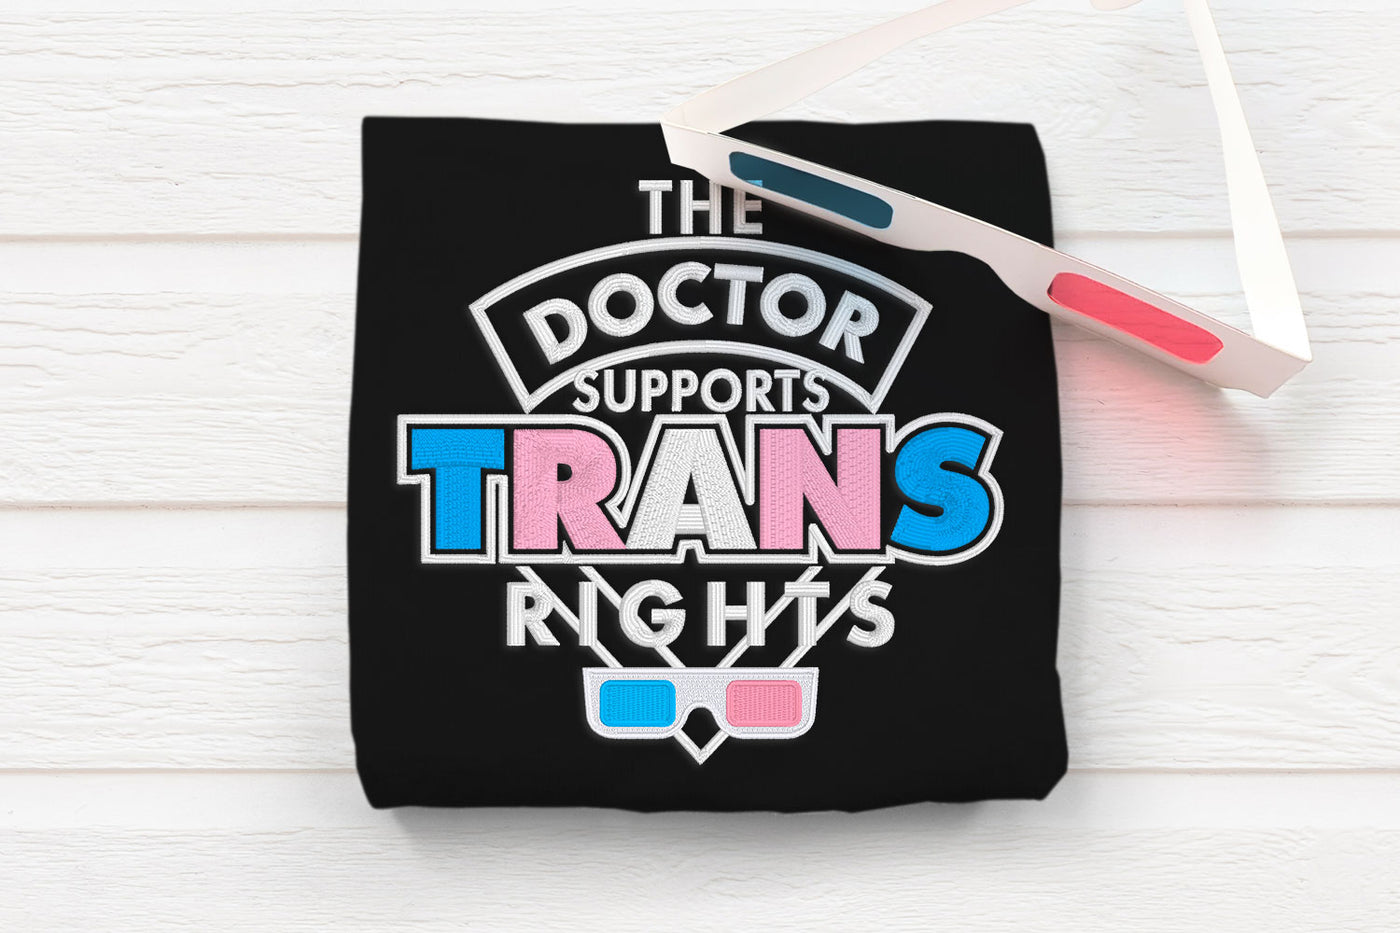 The Doctor Supports Trans Rights Embroidery File